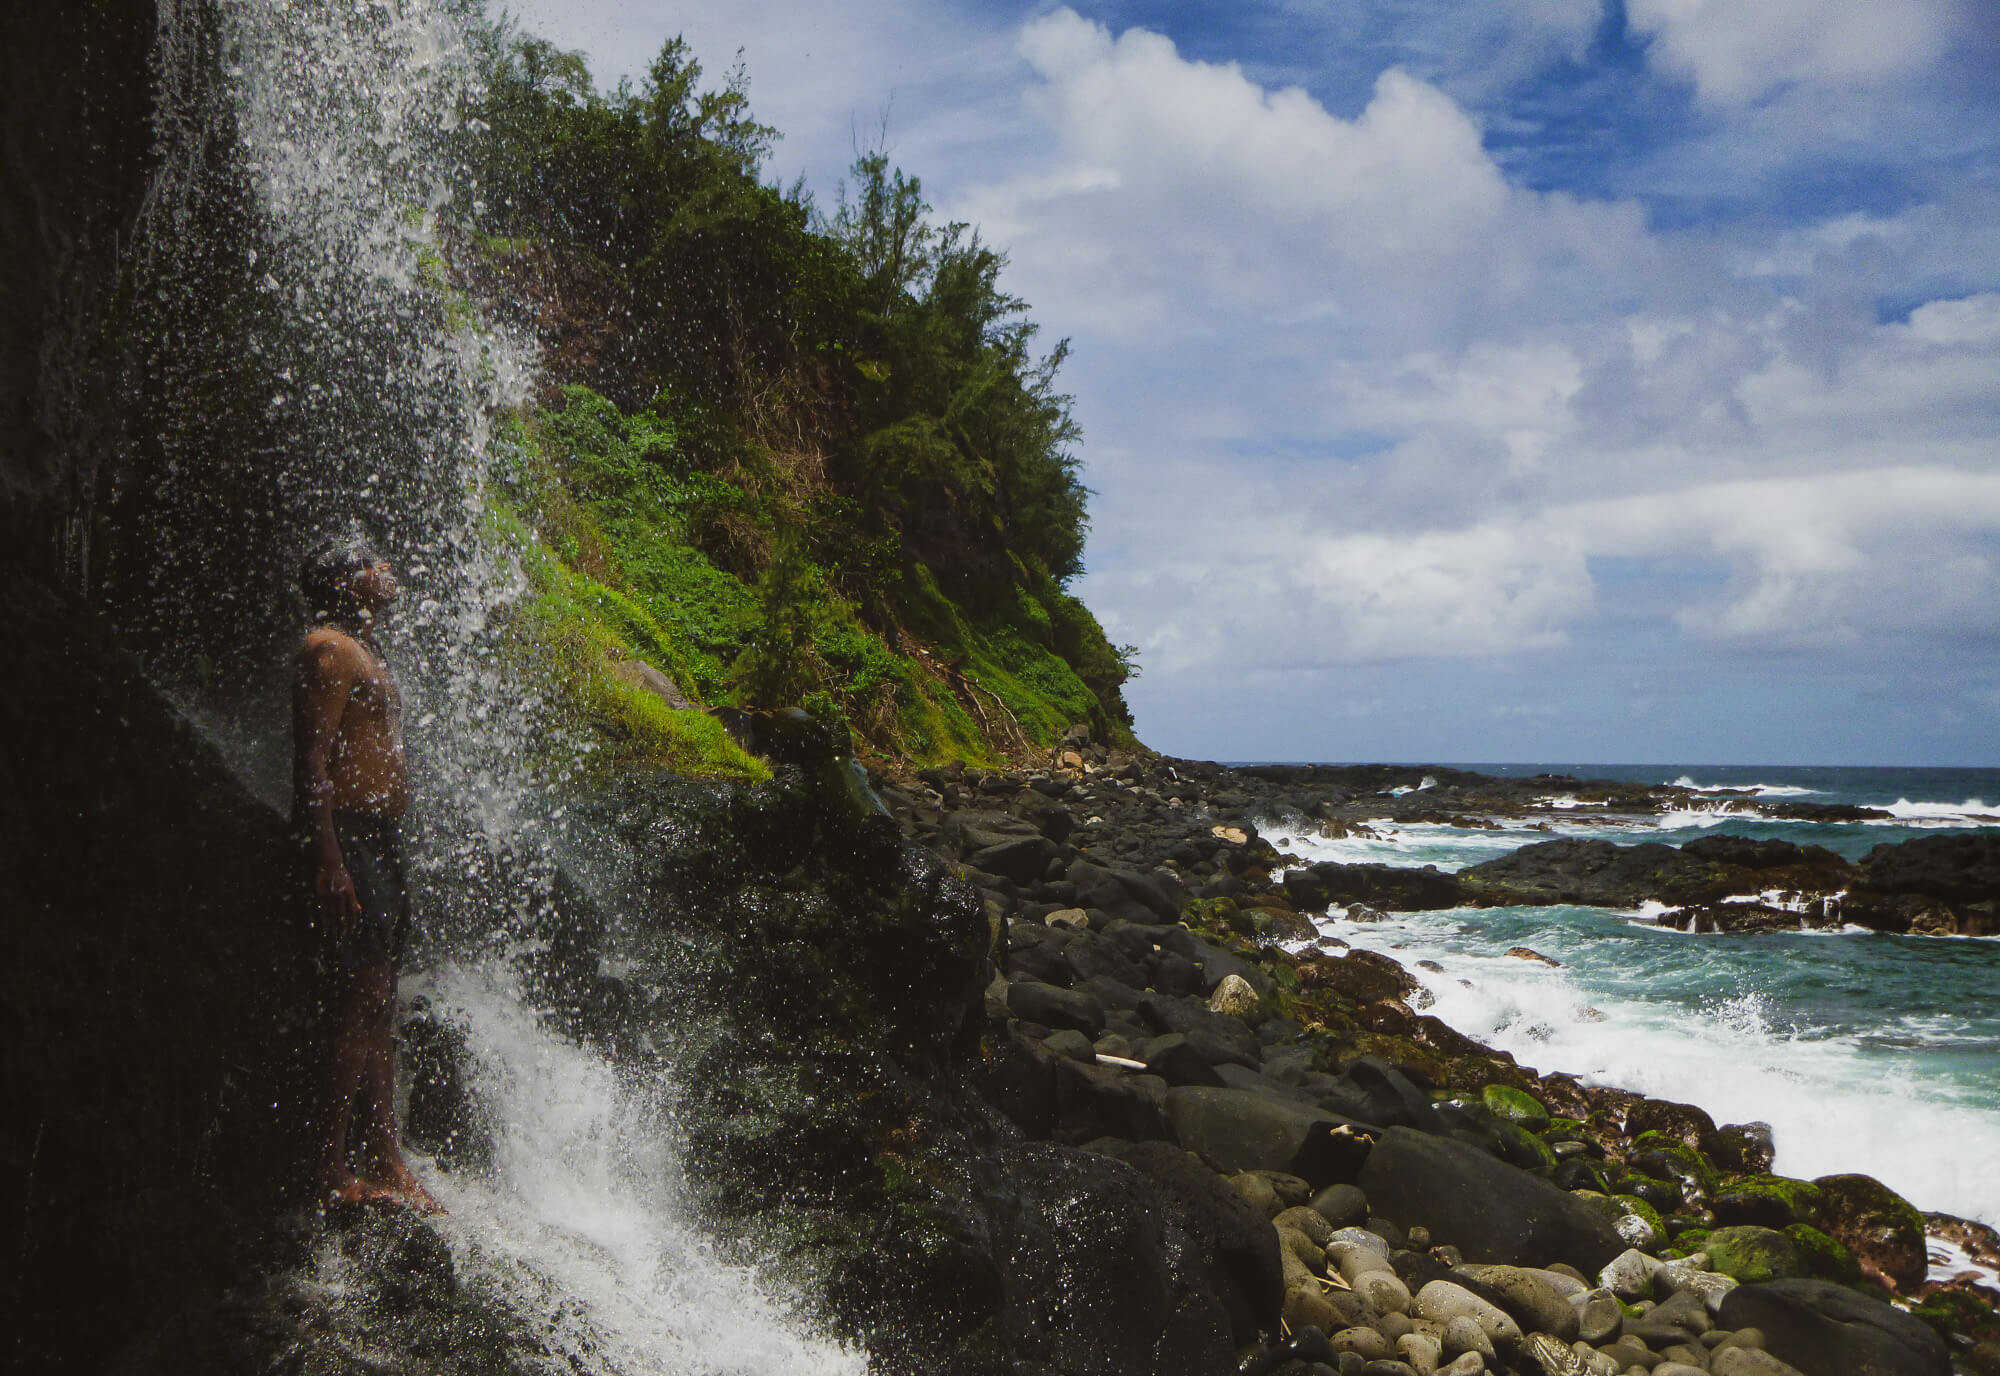 Enjoying a waterfall while hiking on a Mauritius wild beach in the south